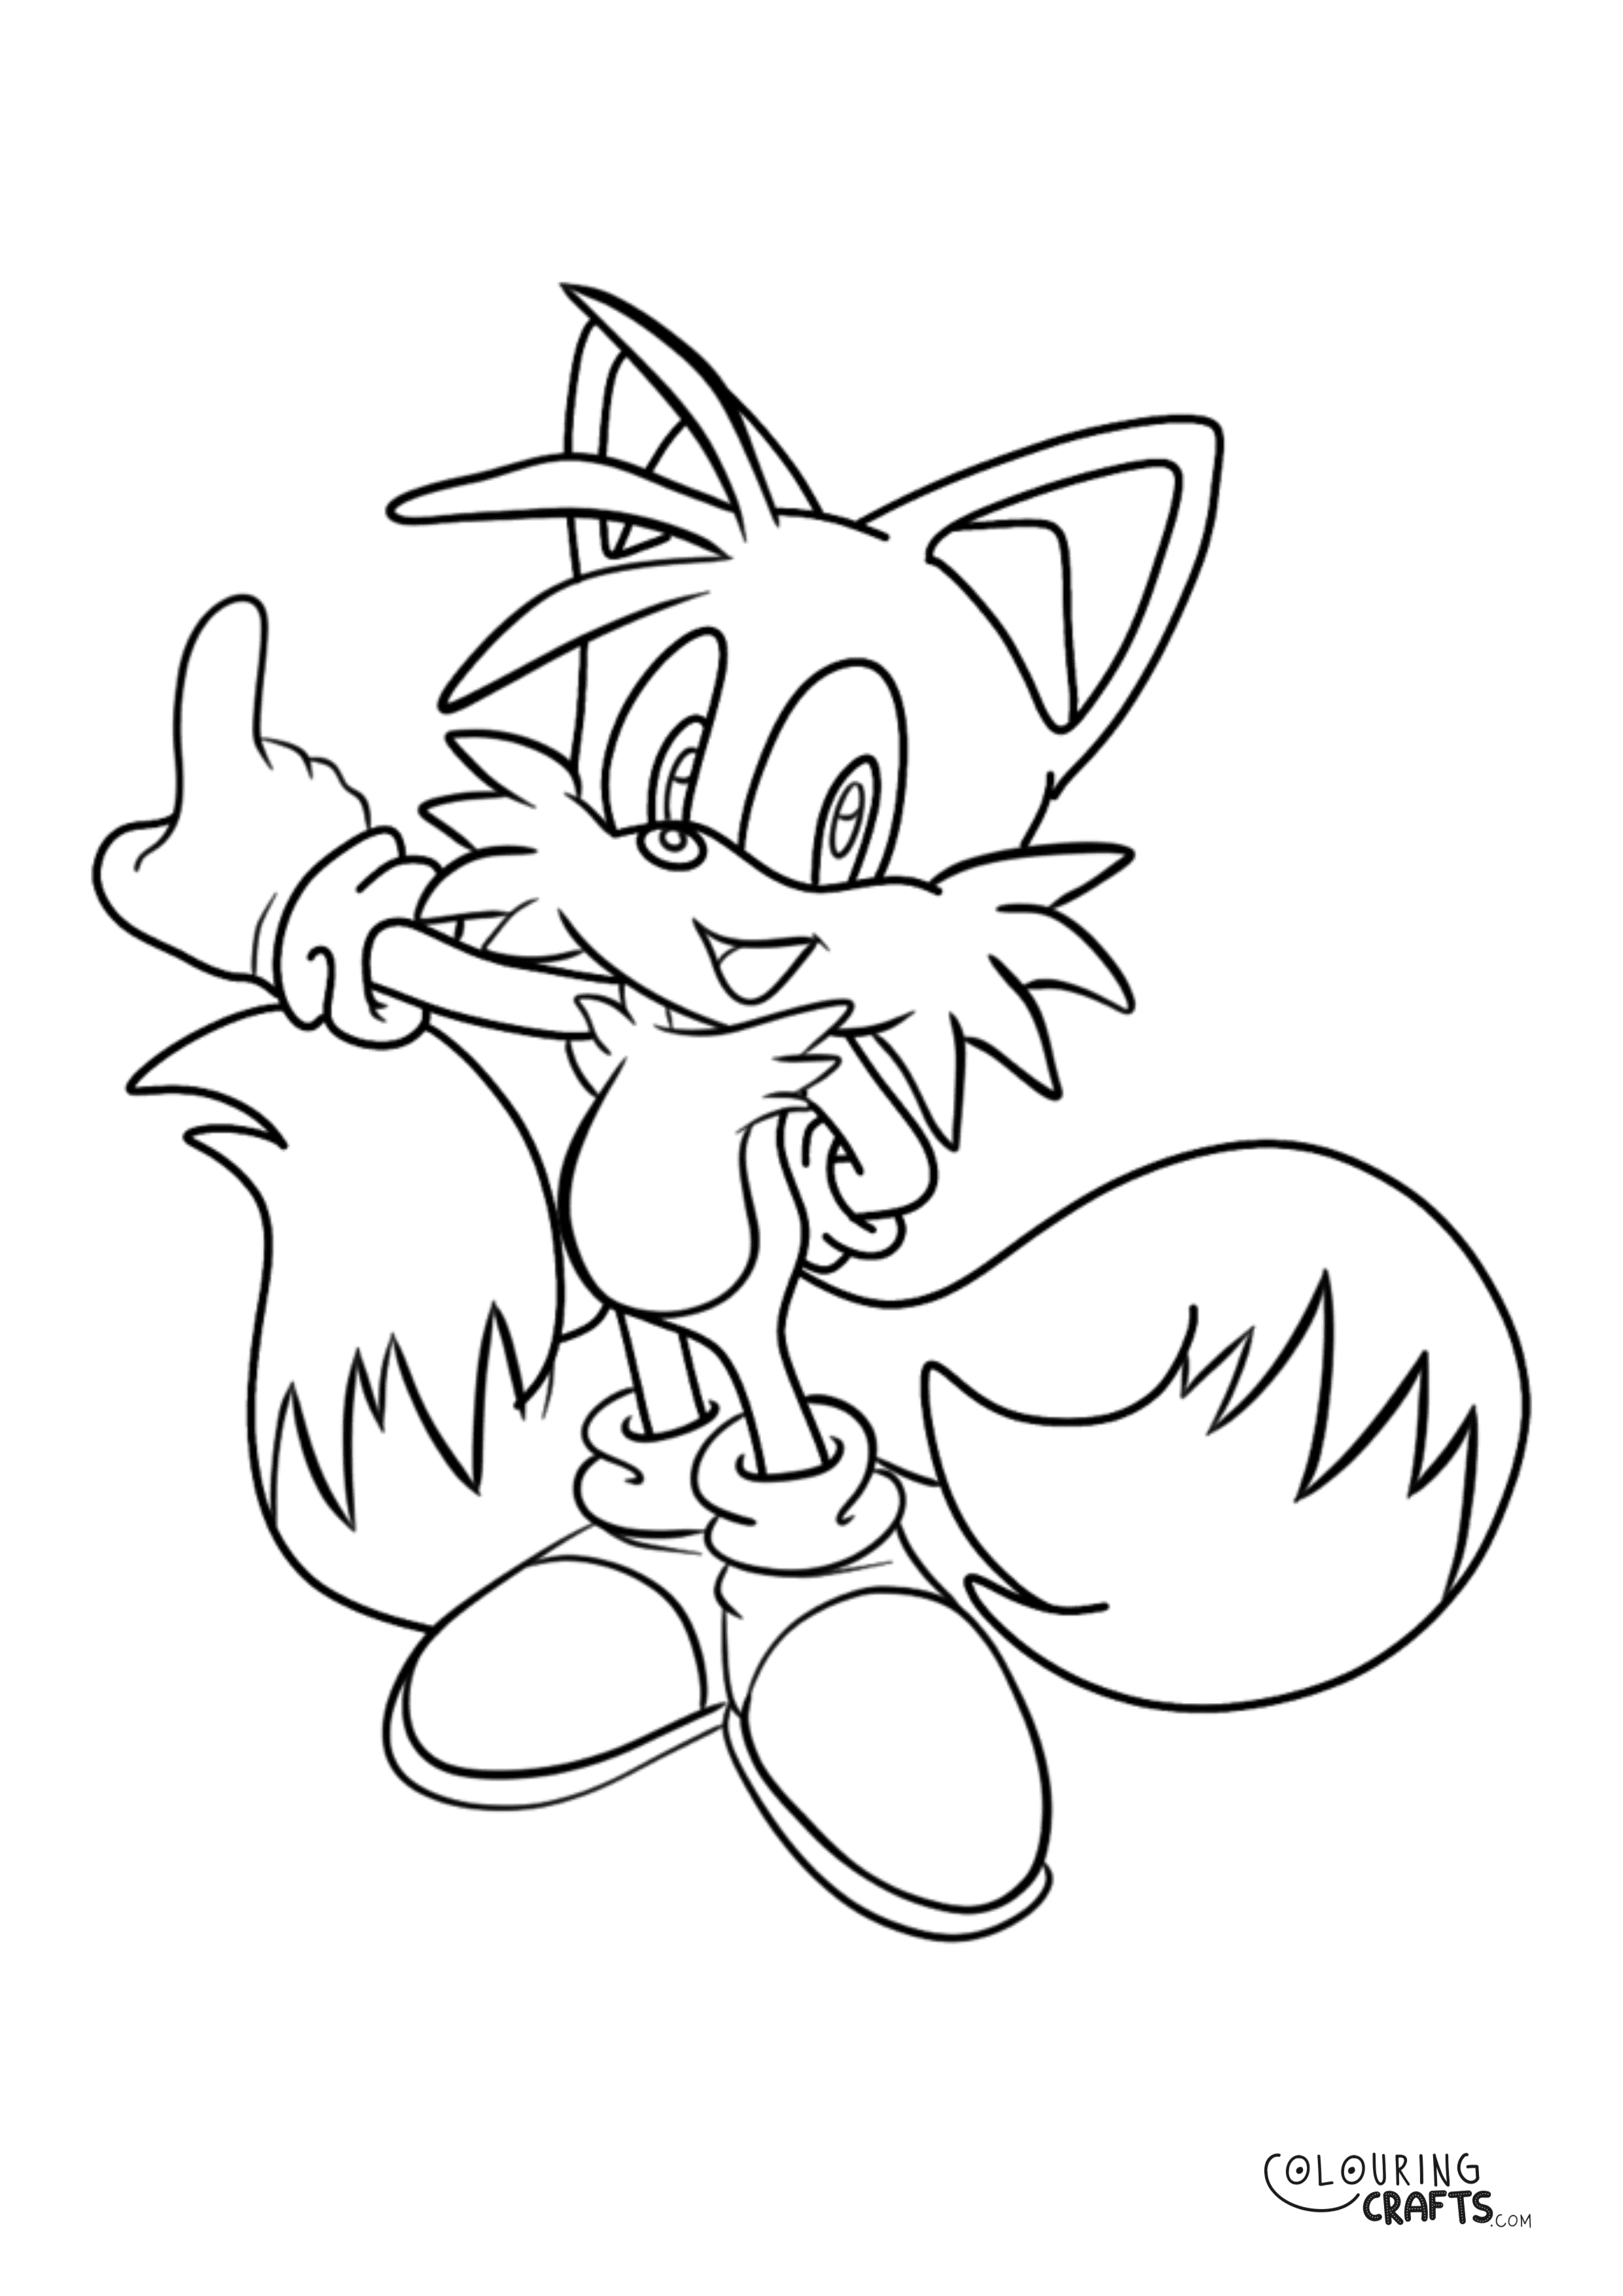 Tails Sonic The Hedgehog Colouring Page - Colouring Crafts